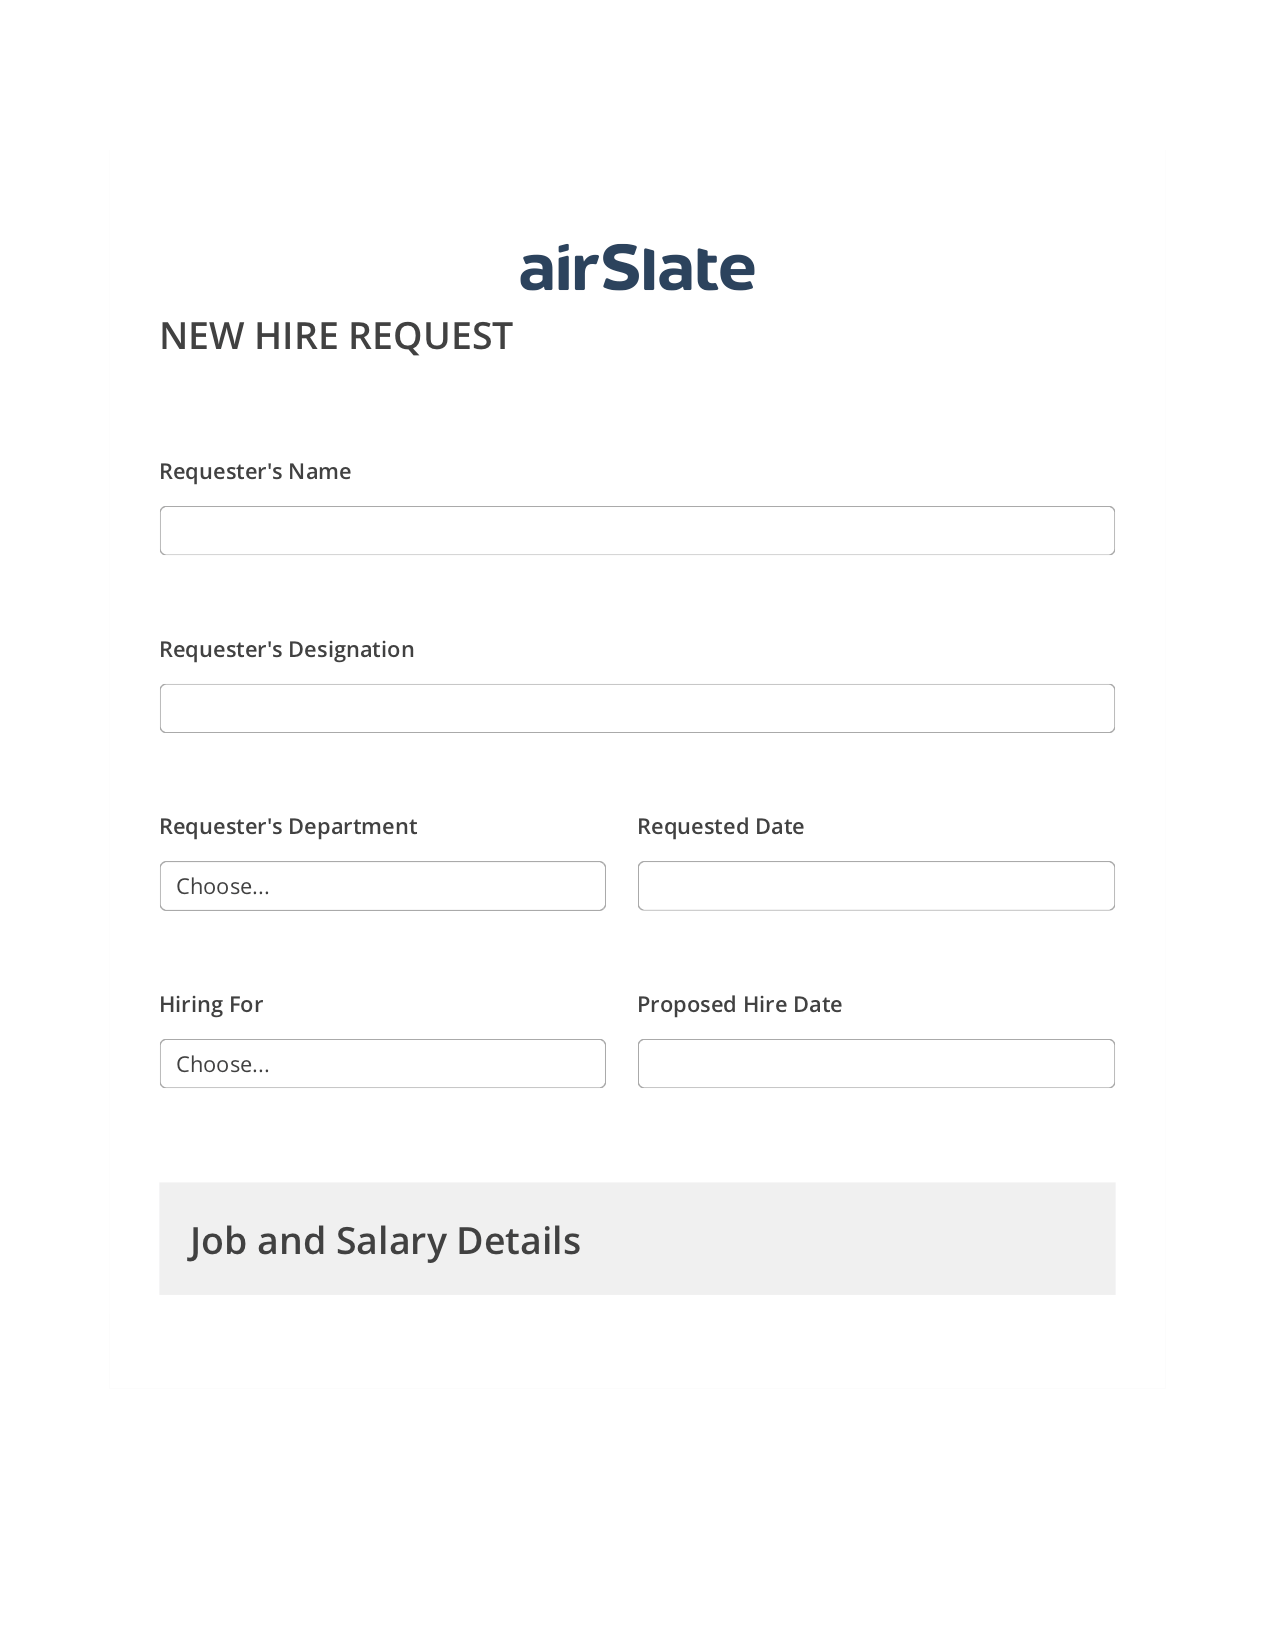 Hiring Request Workflow Pre-fill Dropdowns from Google Sheet Bot, Send Mailchimp Campaign Bot, Archive to Google Drive Bot